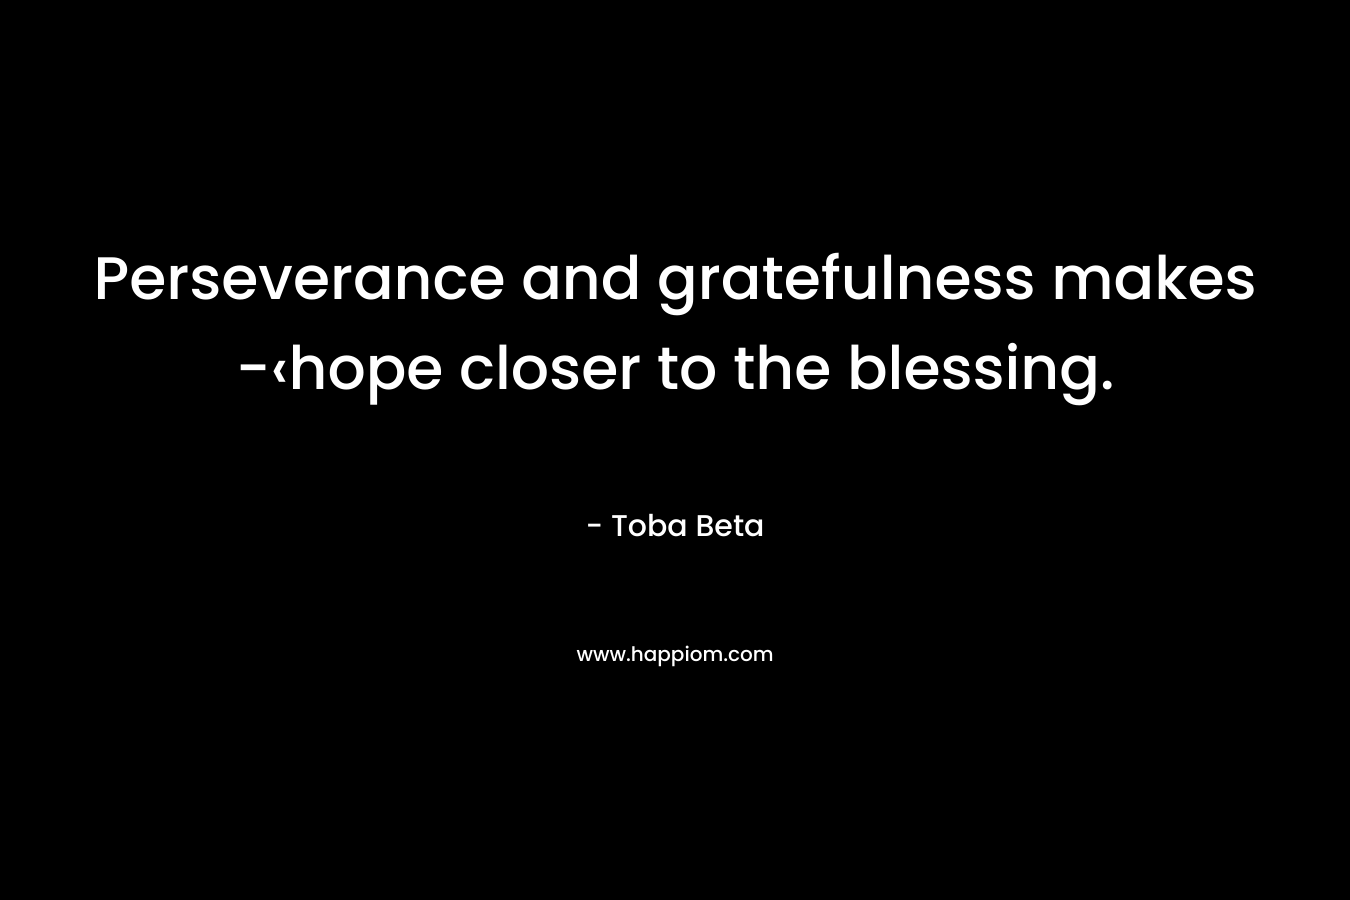 Perseverance and gratefulness makes -‹hope closer to the blessing.